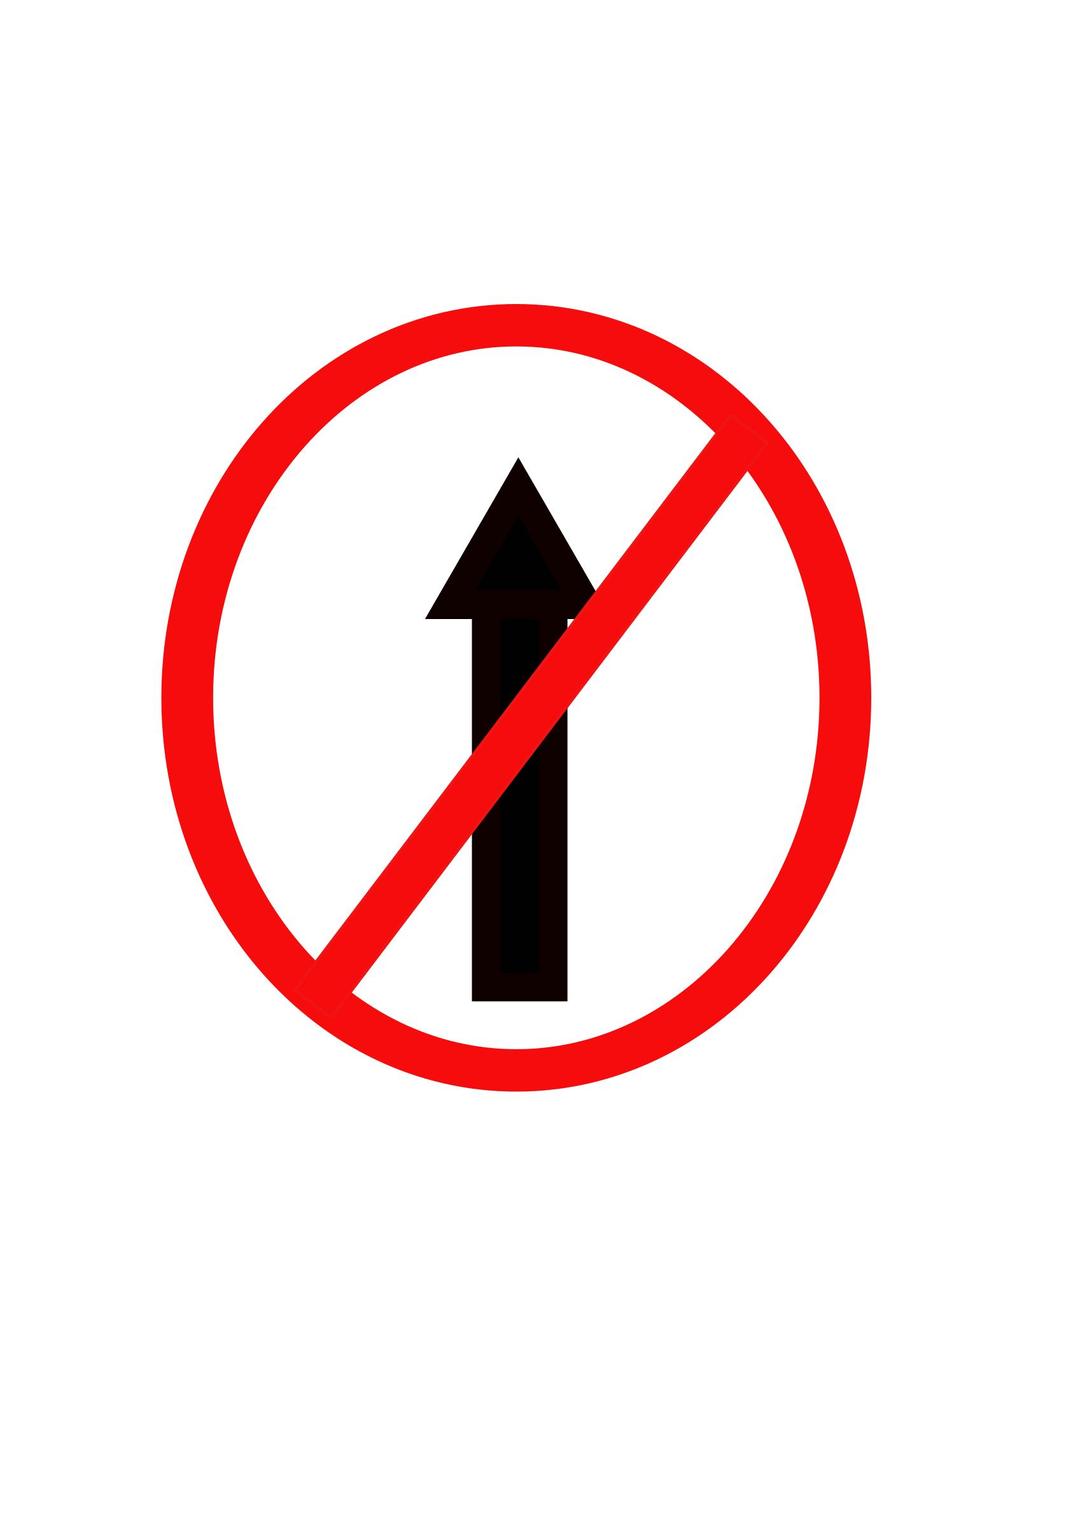 Indian road sign - No entry png transparent